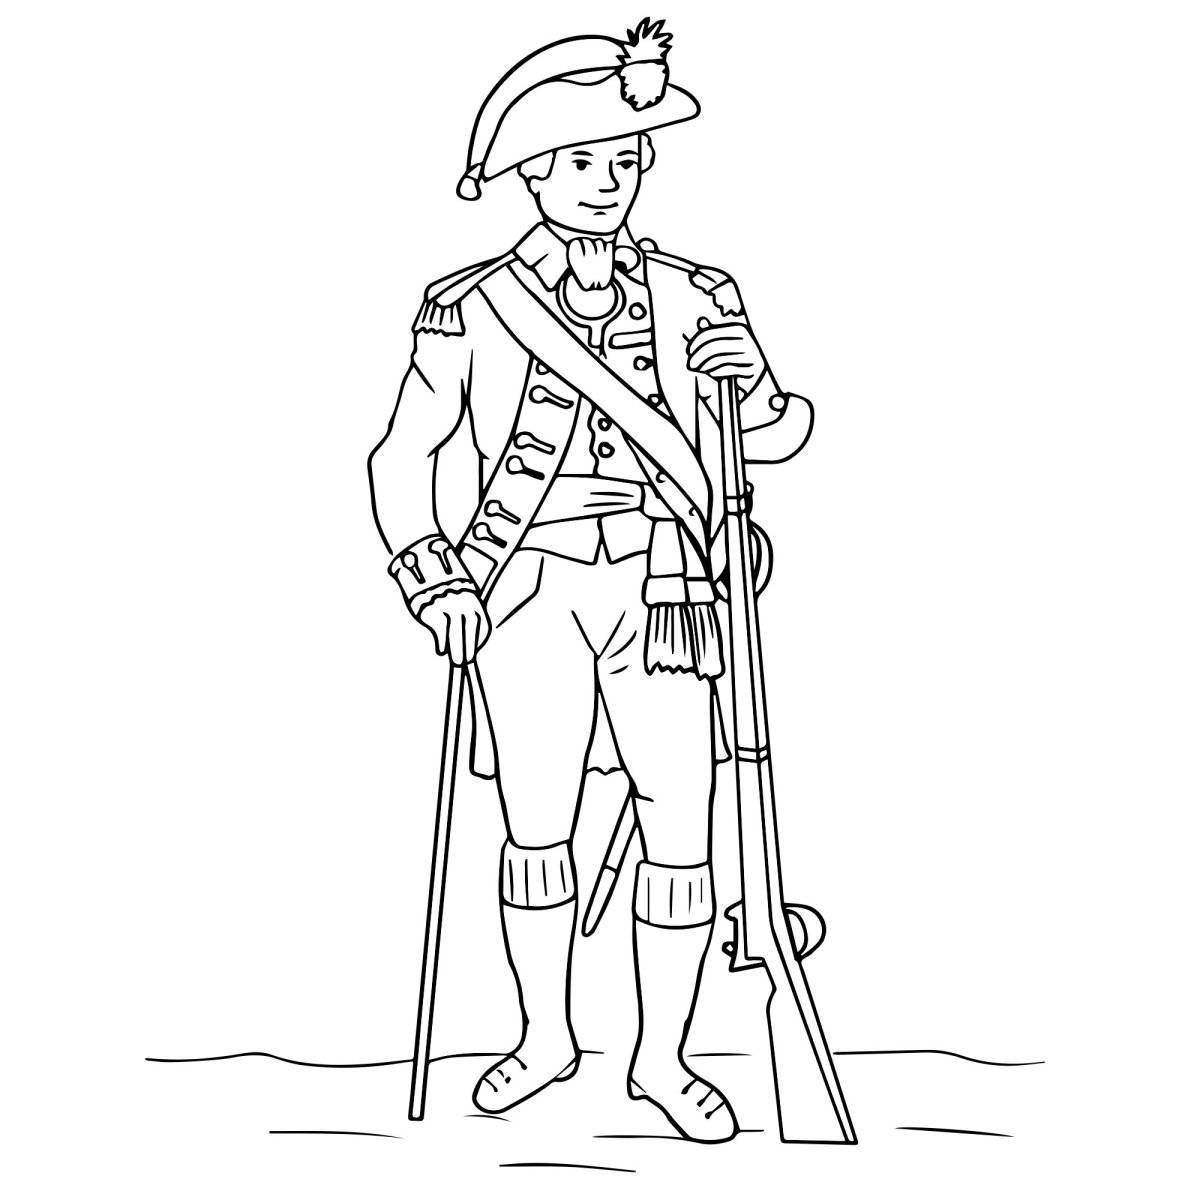 Exciting drawing of a soldier and a child